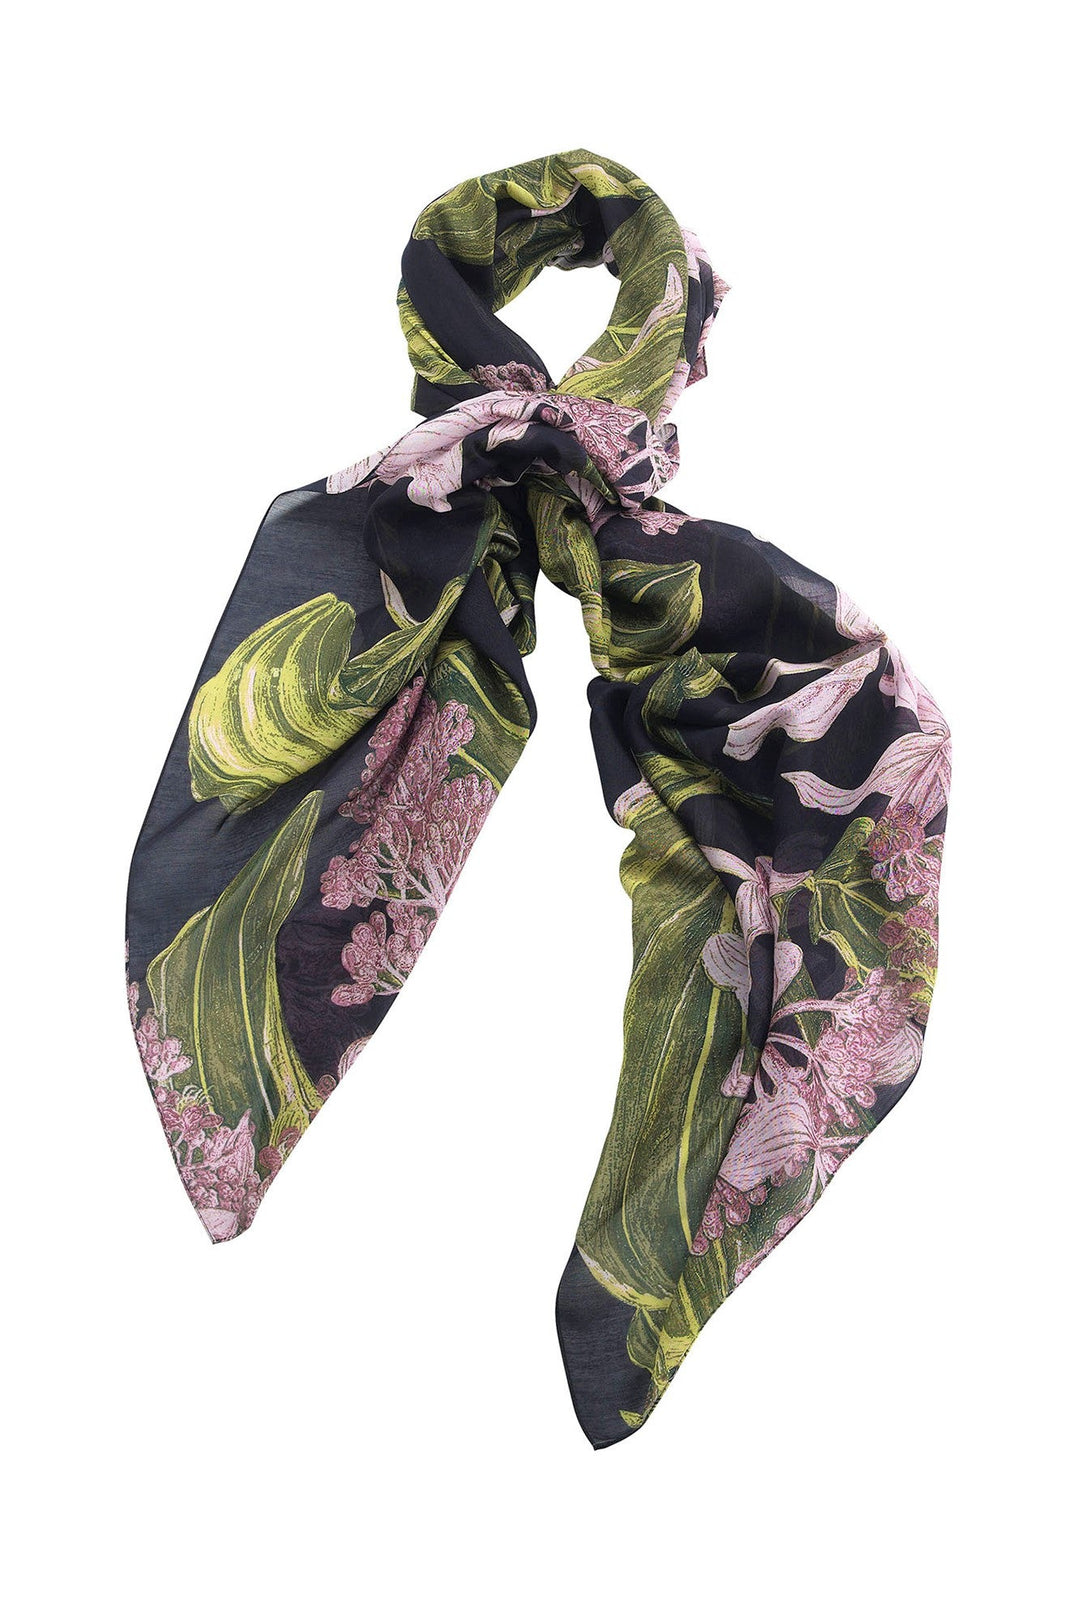 Marianne North Medinilla Scarf- Our scarves are a full 100cm x 200cm making them perfect for layering in the winter months or worn as a delicate cover up during the summer seasons.